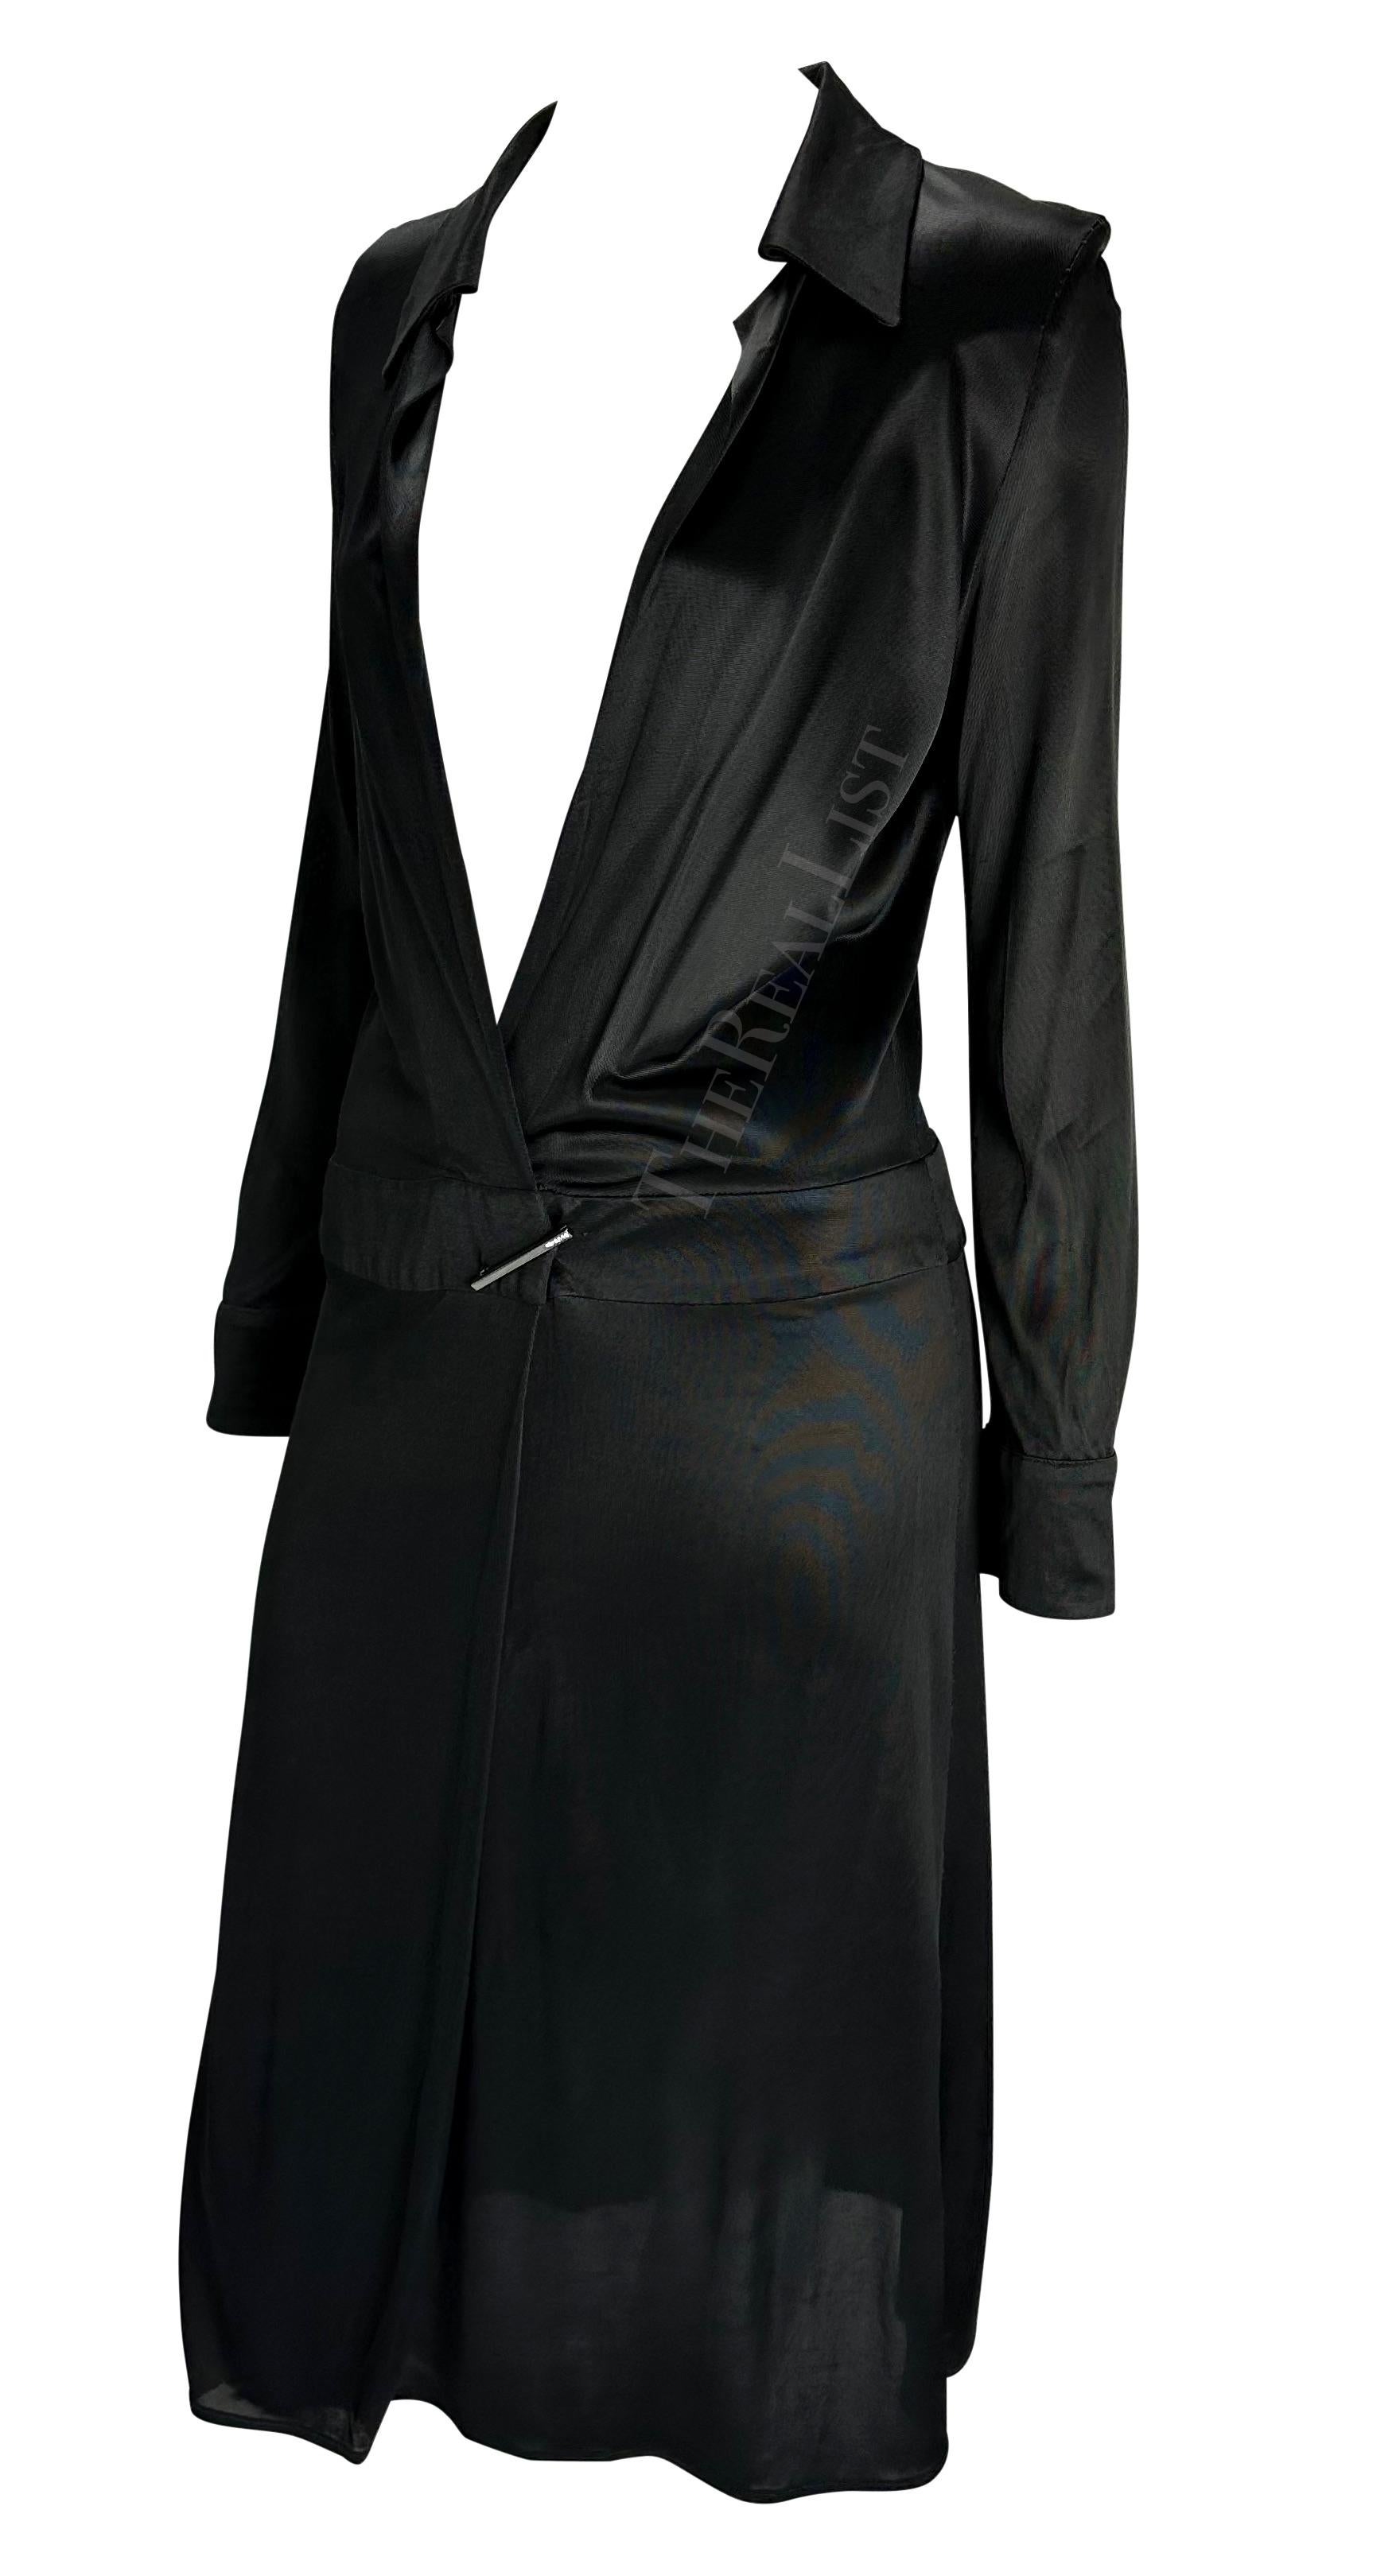 Women's S/S 2000 Gucci by Tom Ford Runway Plunging Neckline Black Viscose Runway Dress For Sale